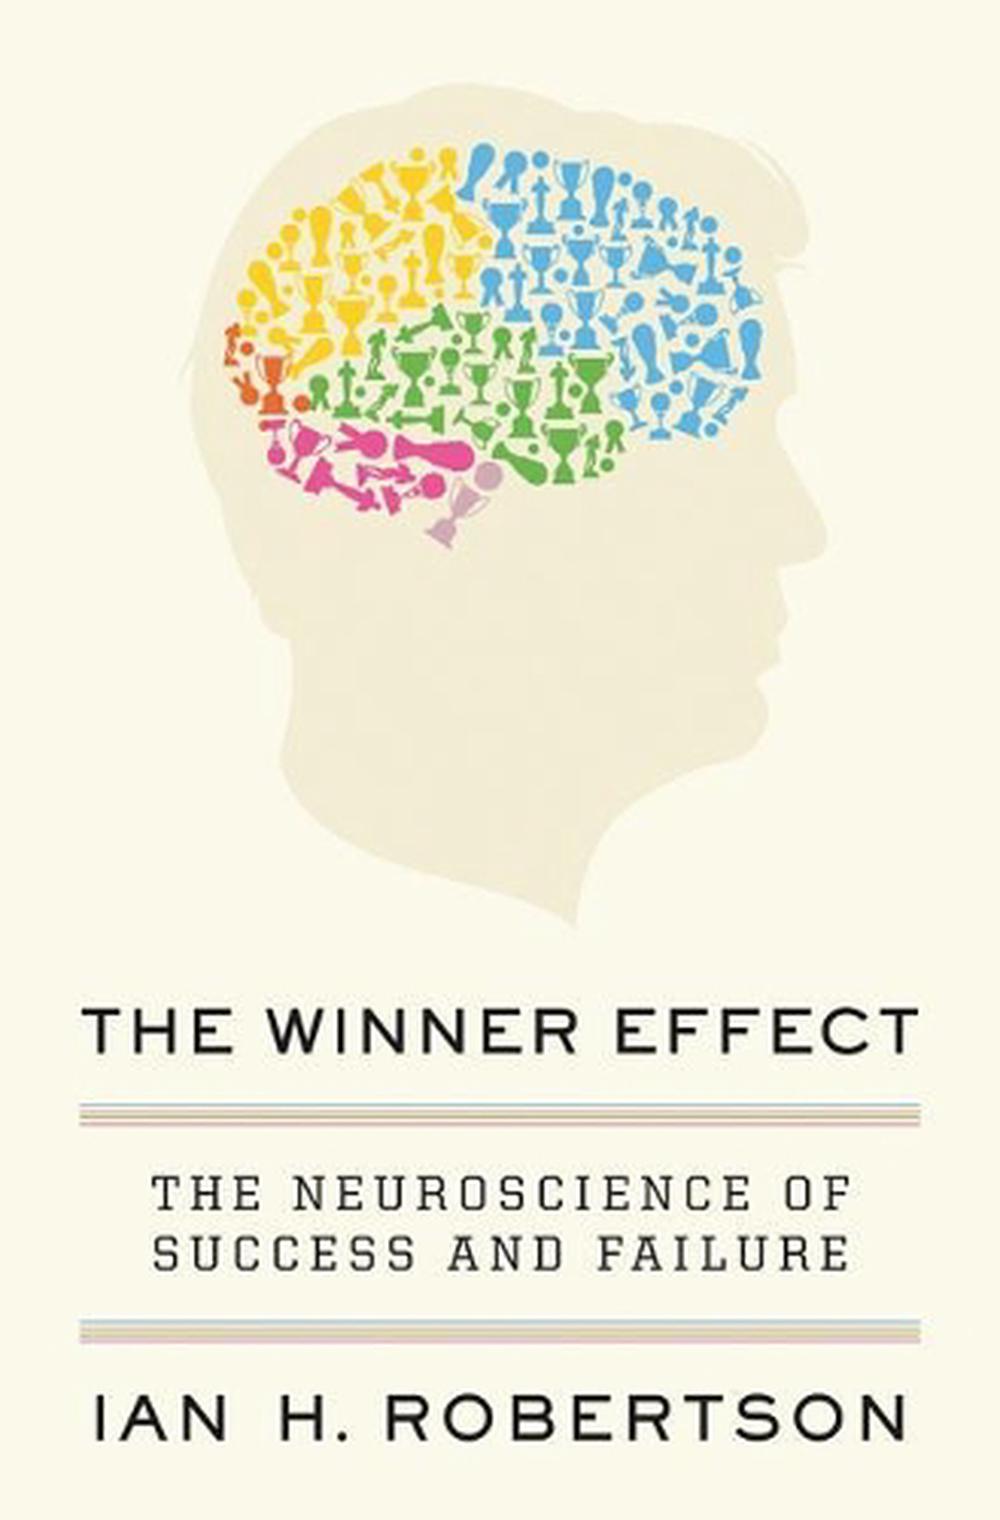 The Winner Effect The Neuroscience of Success and Failure by Ian H